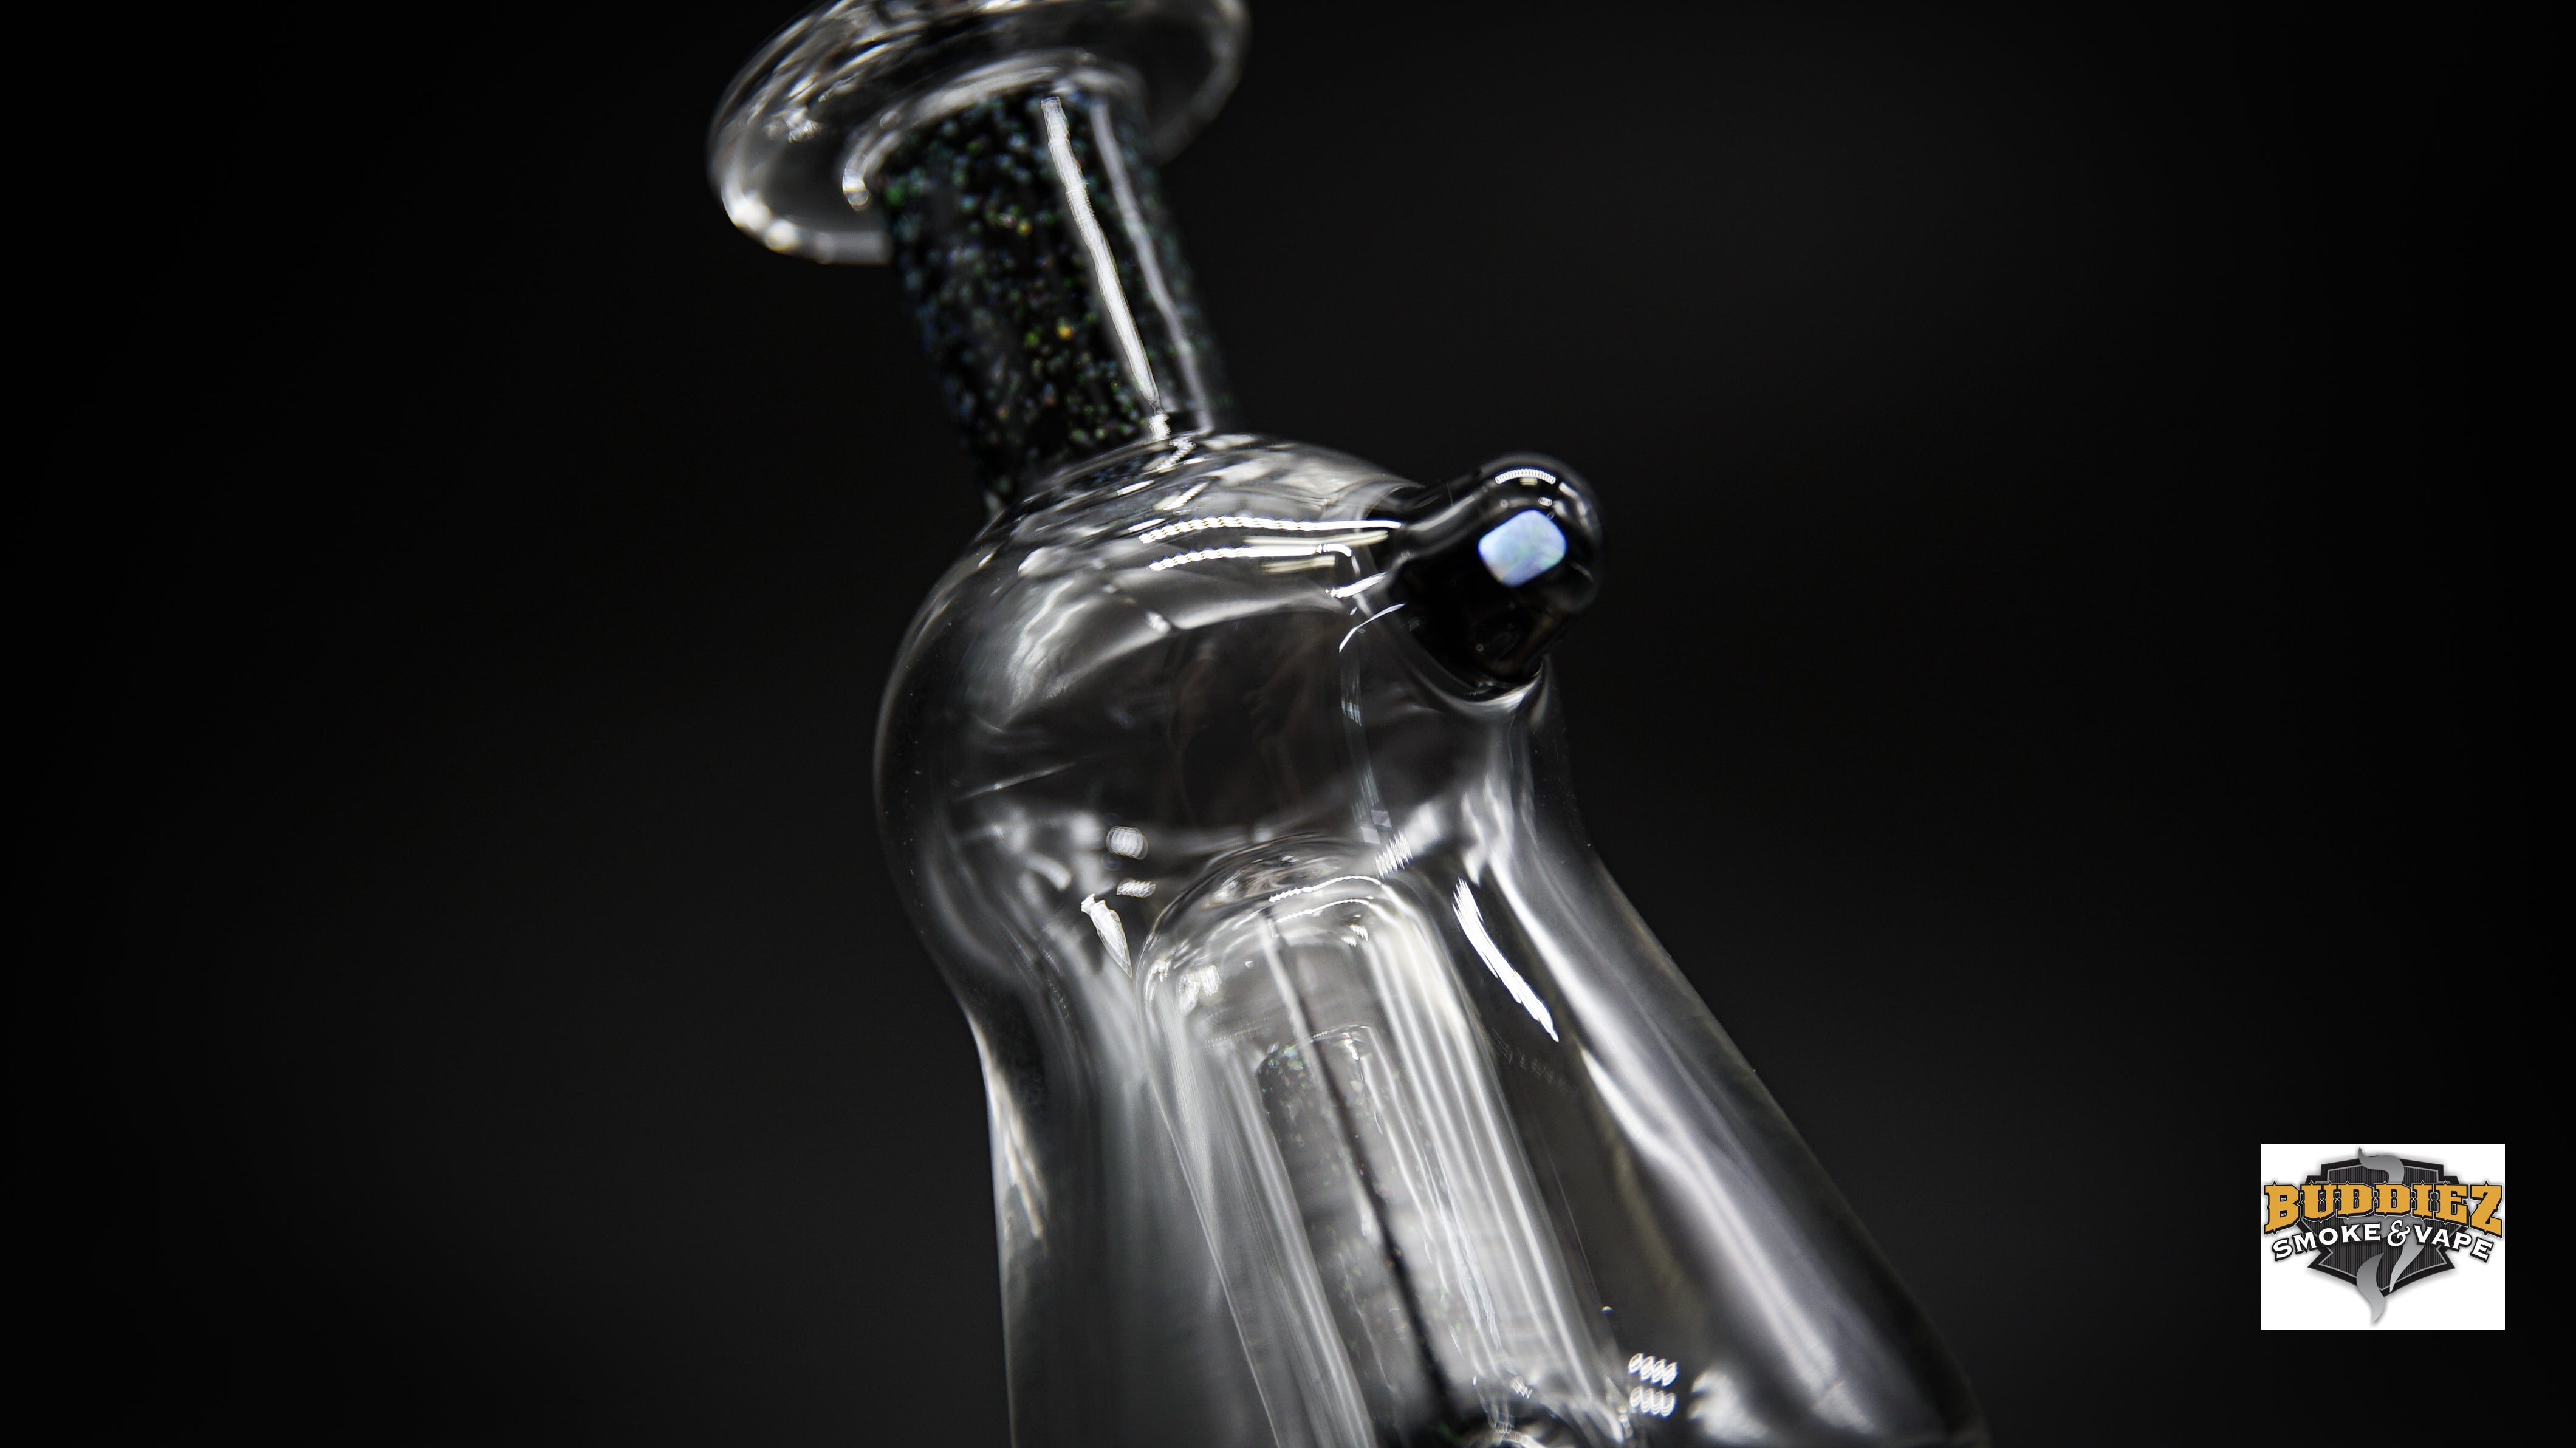 Puffco attachment By AJSurfCityTubes